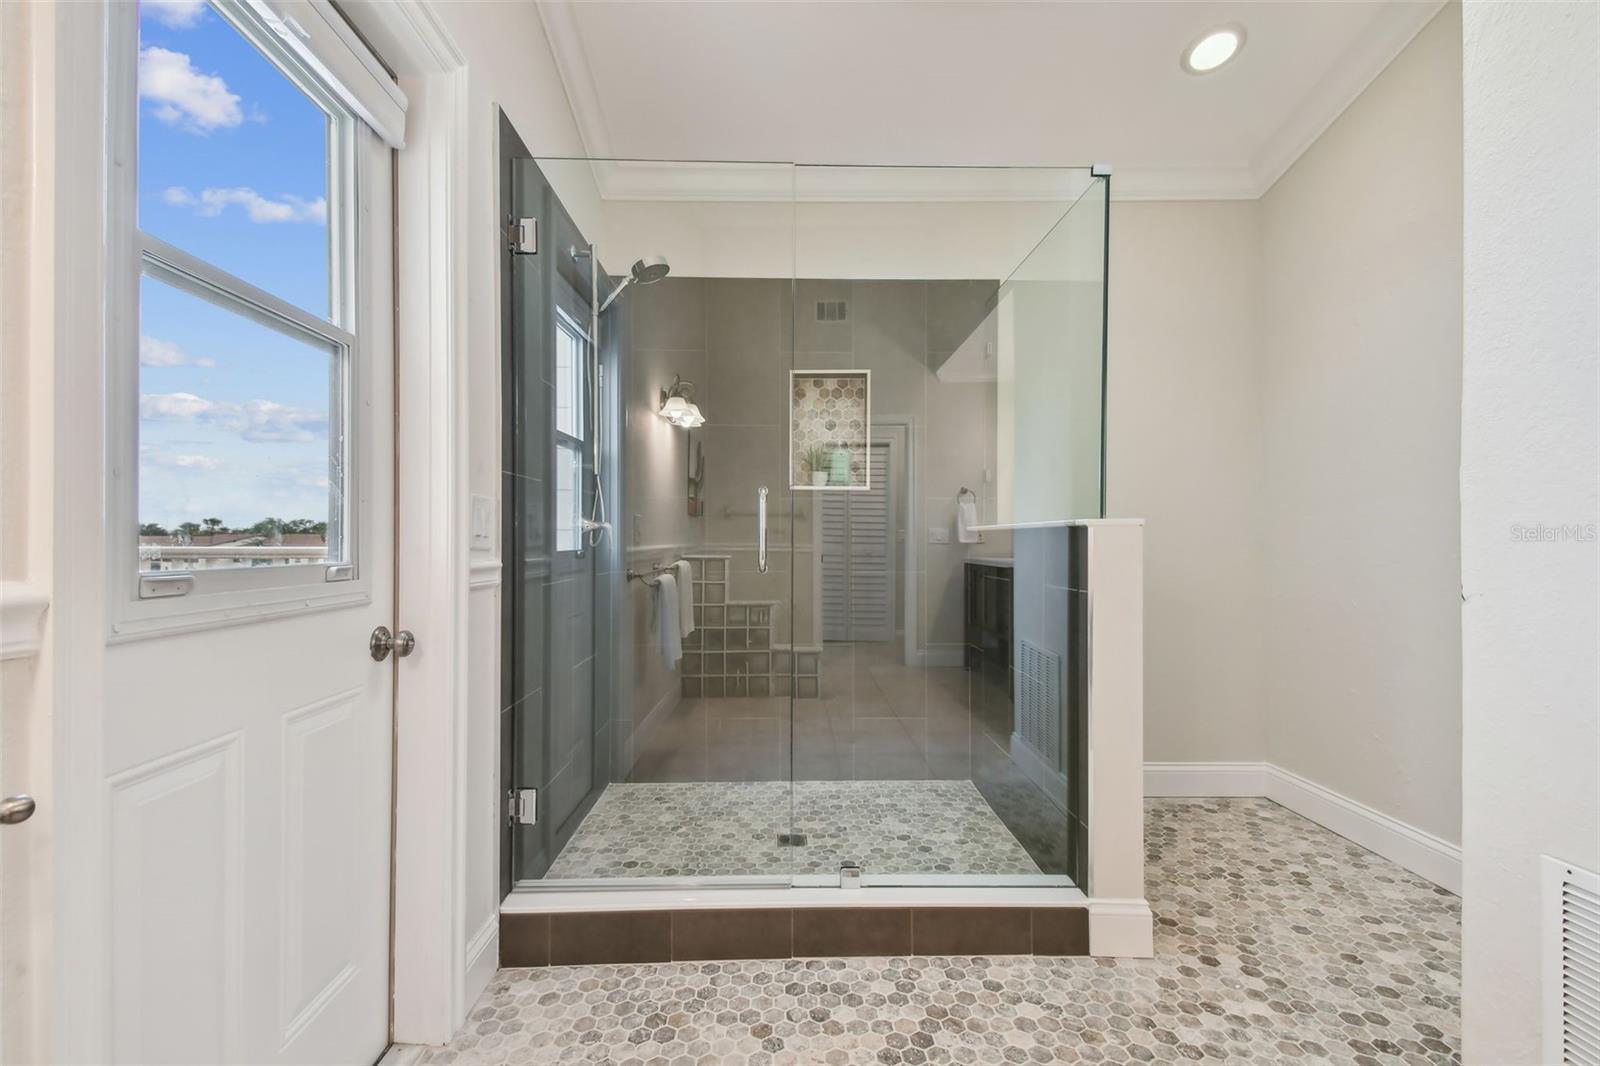 New walk-in shower with access to 3rd floor waterfront deck